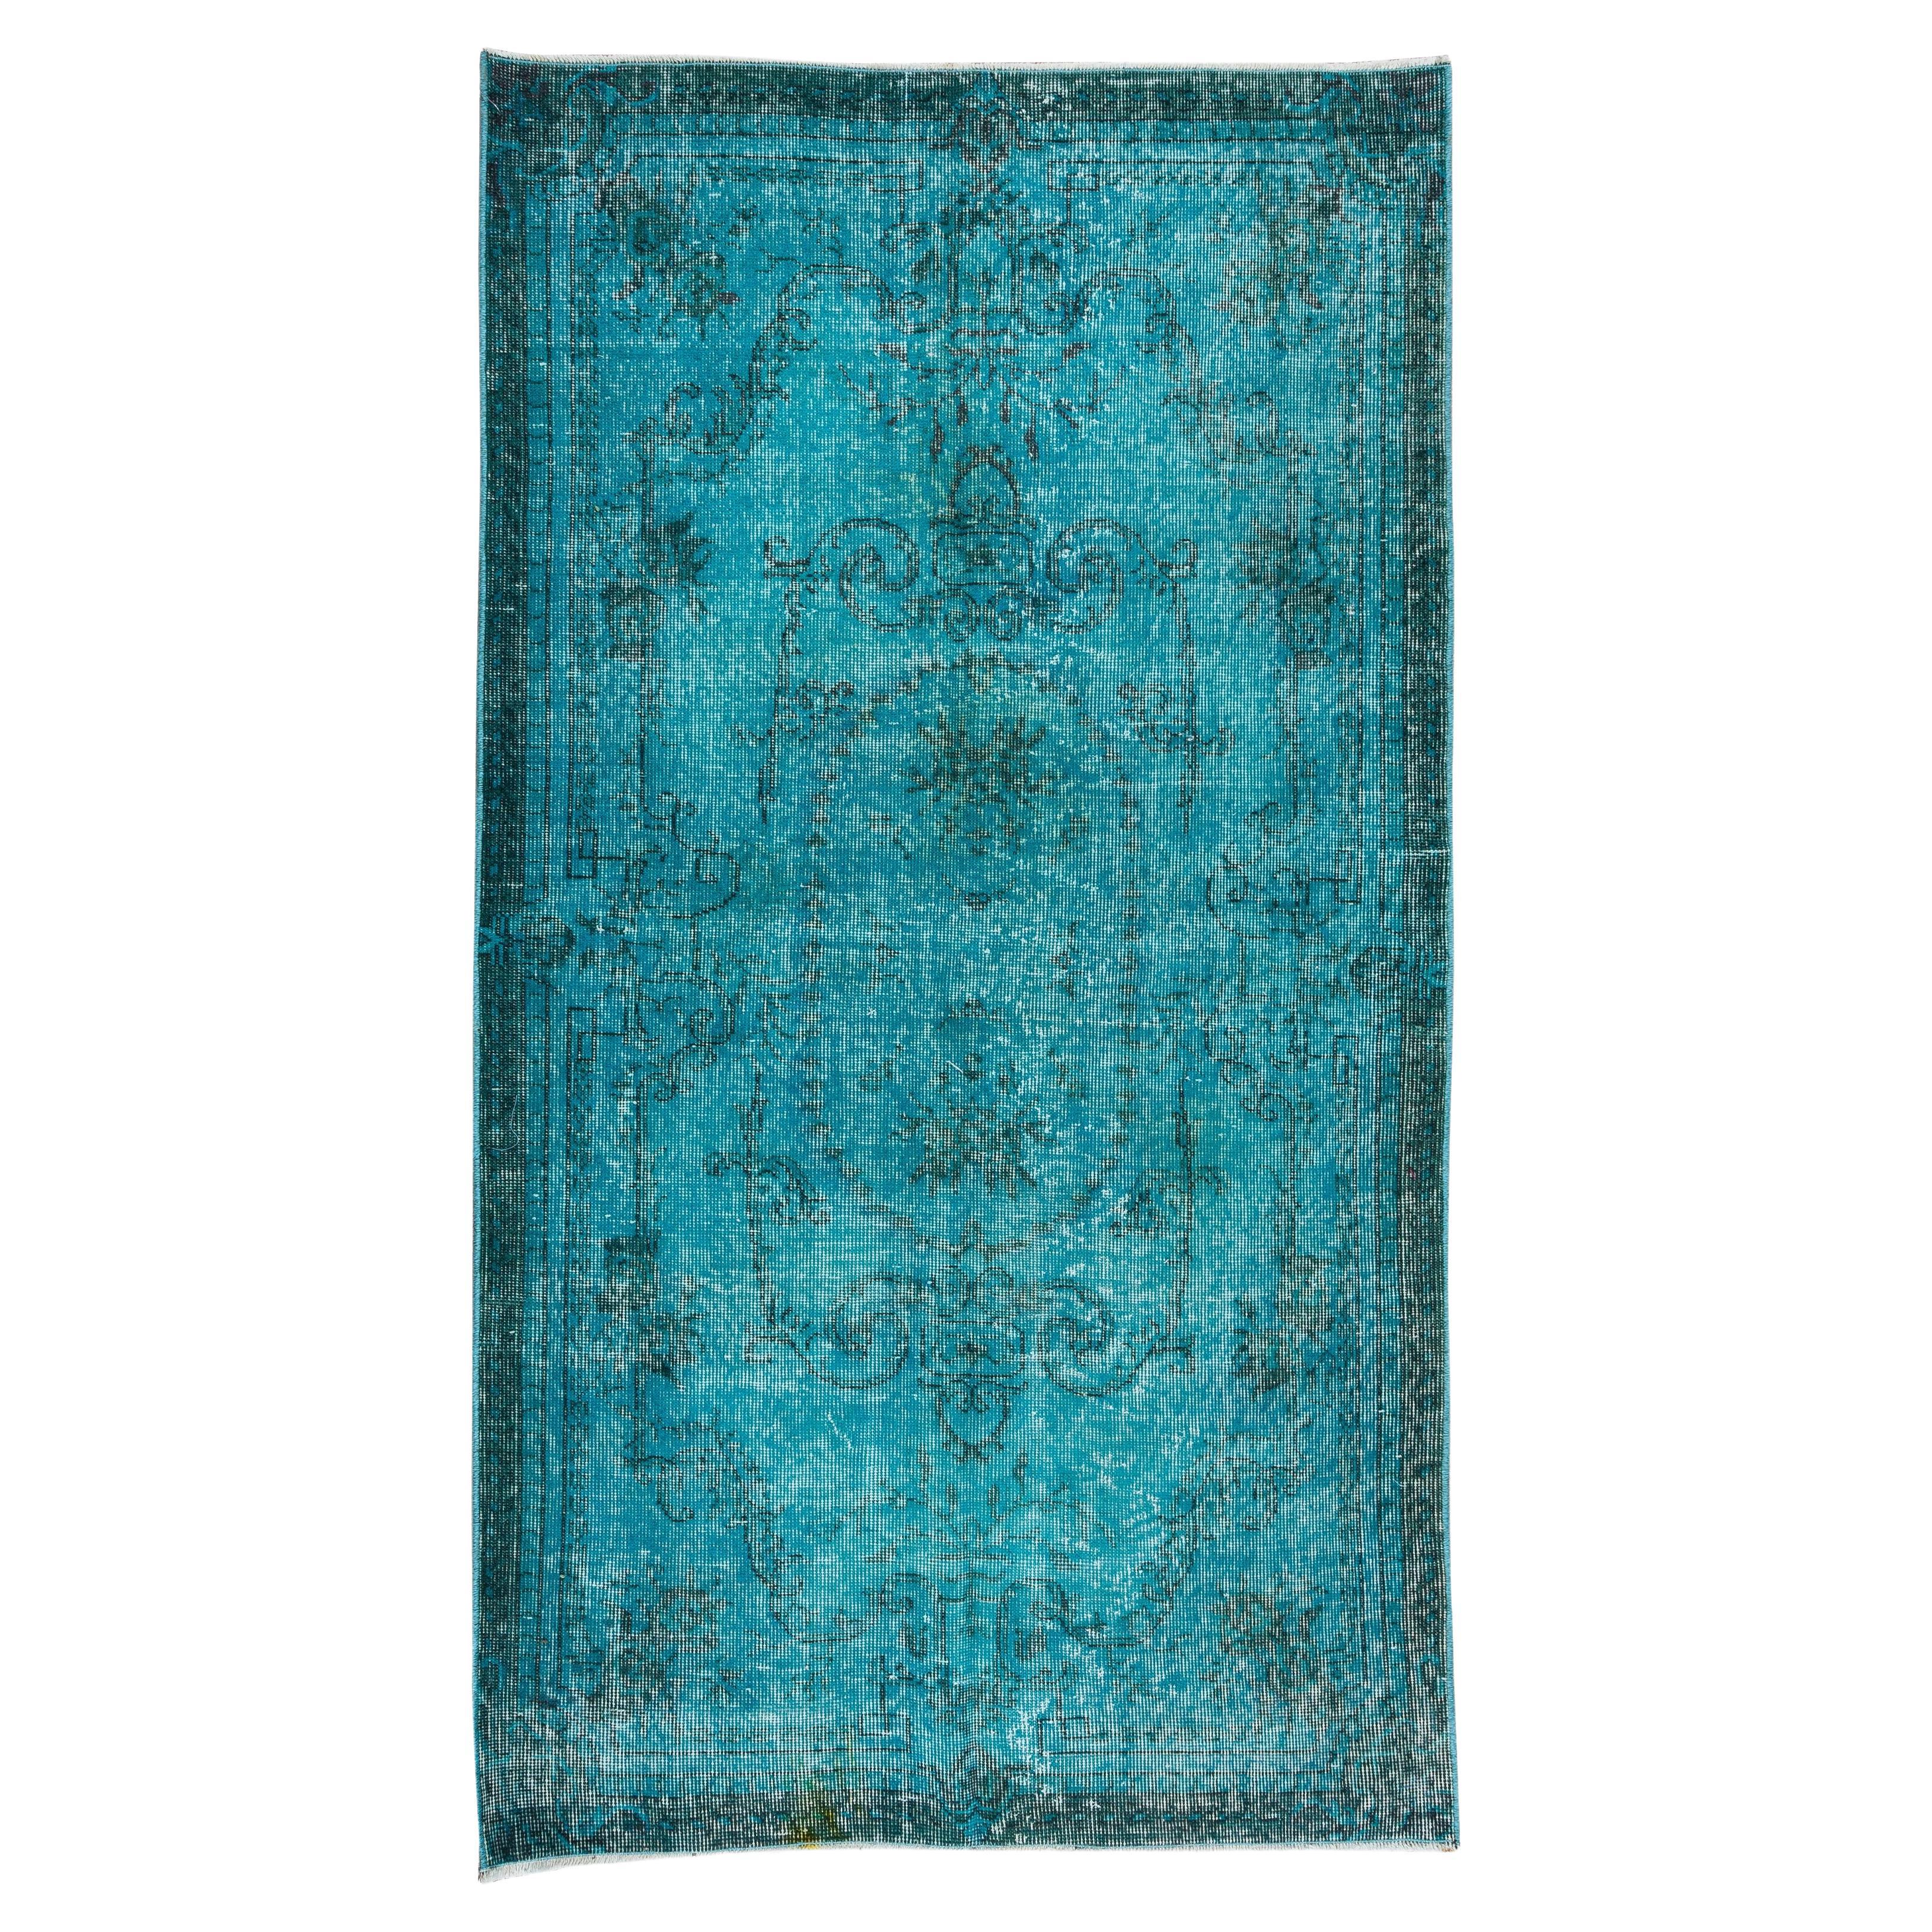 Handmade Turkish Rug in Teal Blue & Turquoise, Ideal 4 Modern Interiors For Sale